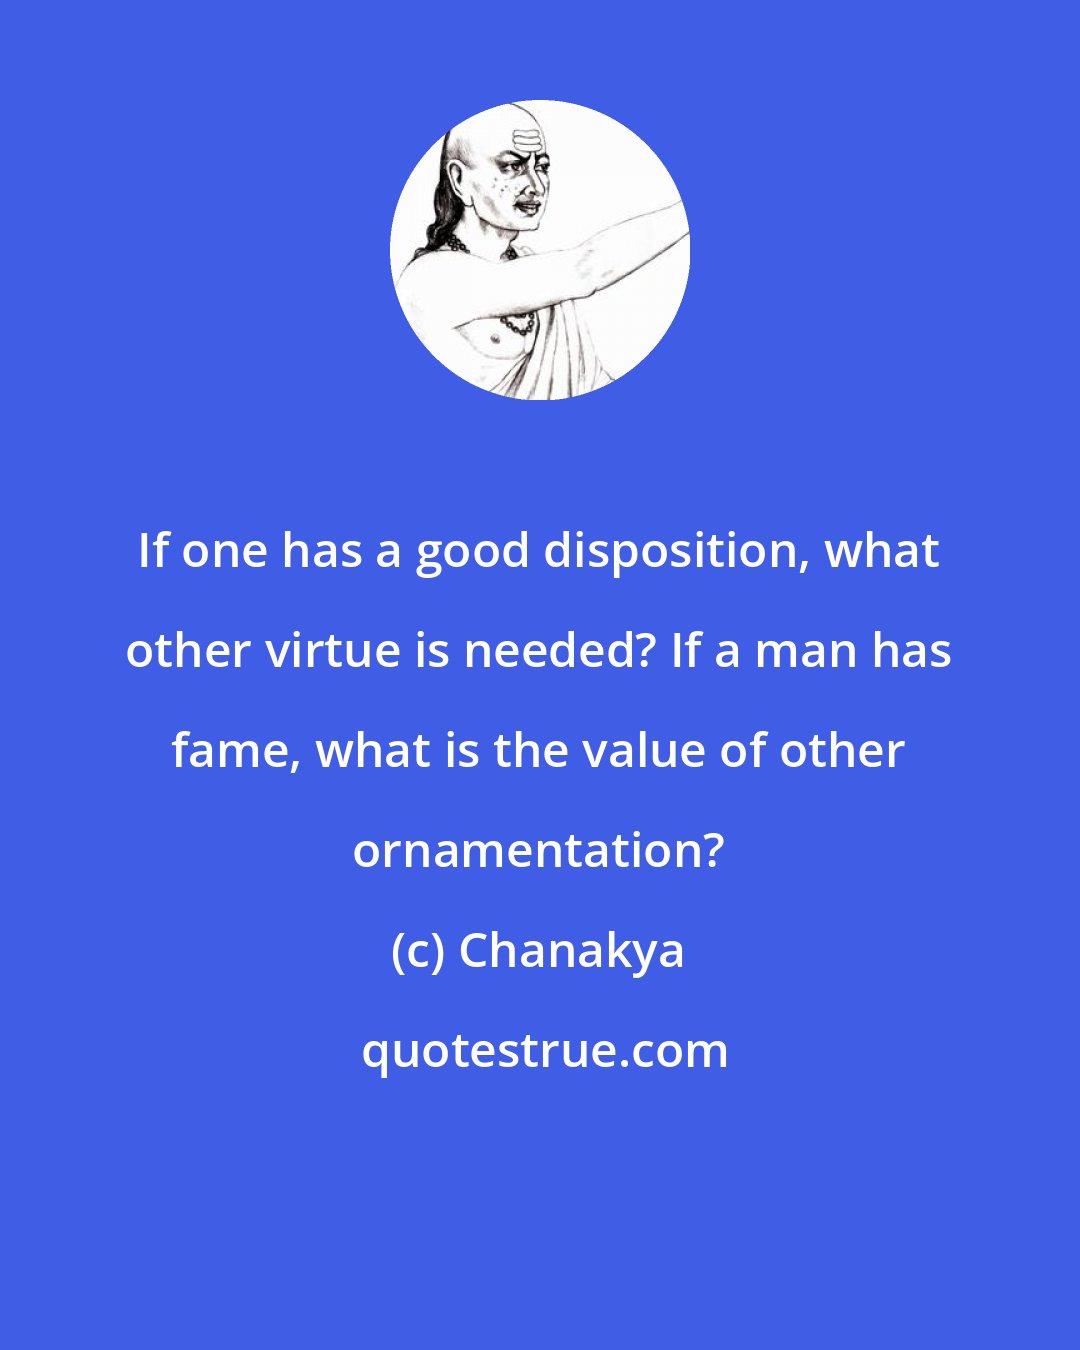 Chanakya: If one has a good disposition, what other virtue is needed? If a man has fame, what is the value of other ornamentation?